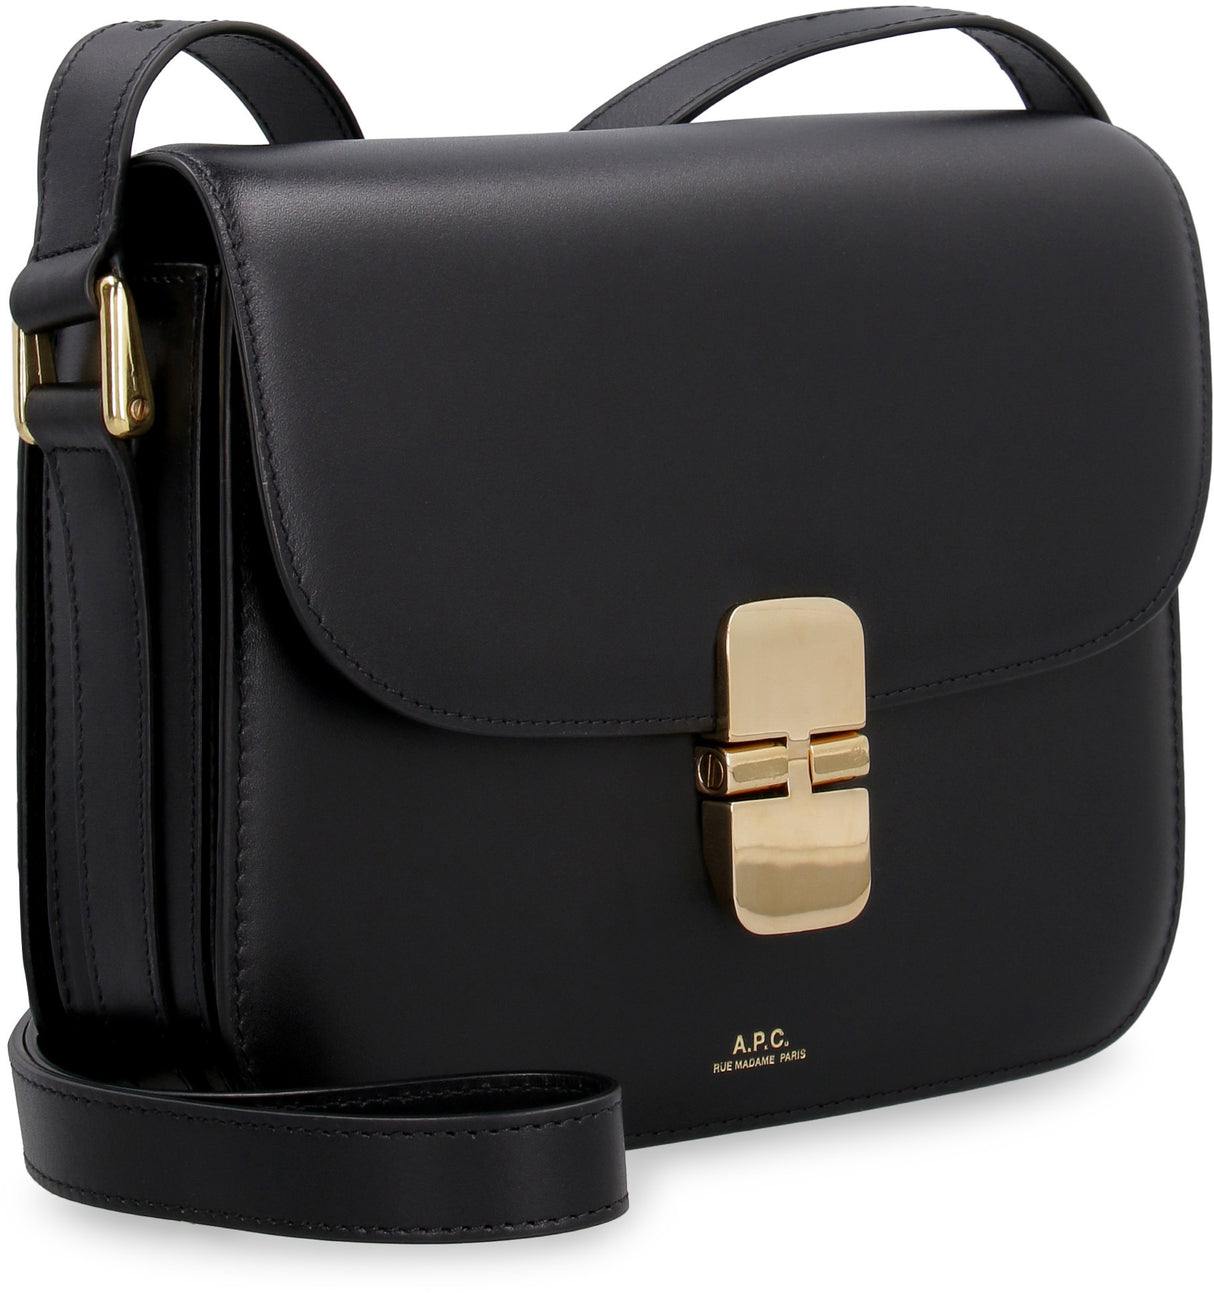 A.P.C. Grace Small Black Leather Crossbody Handbag with Gold-Tone Accents